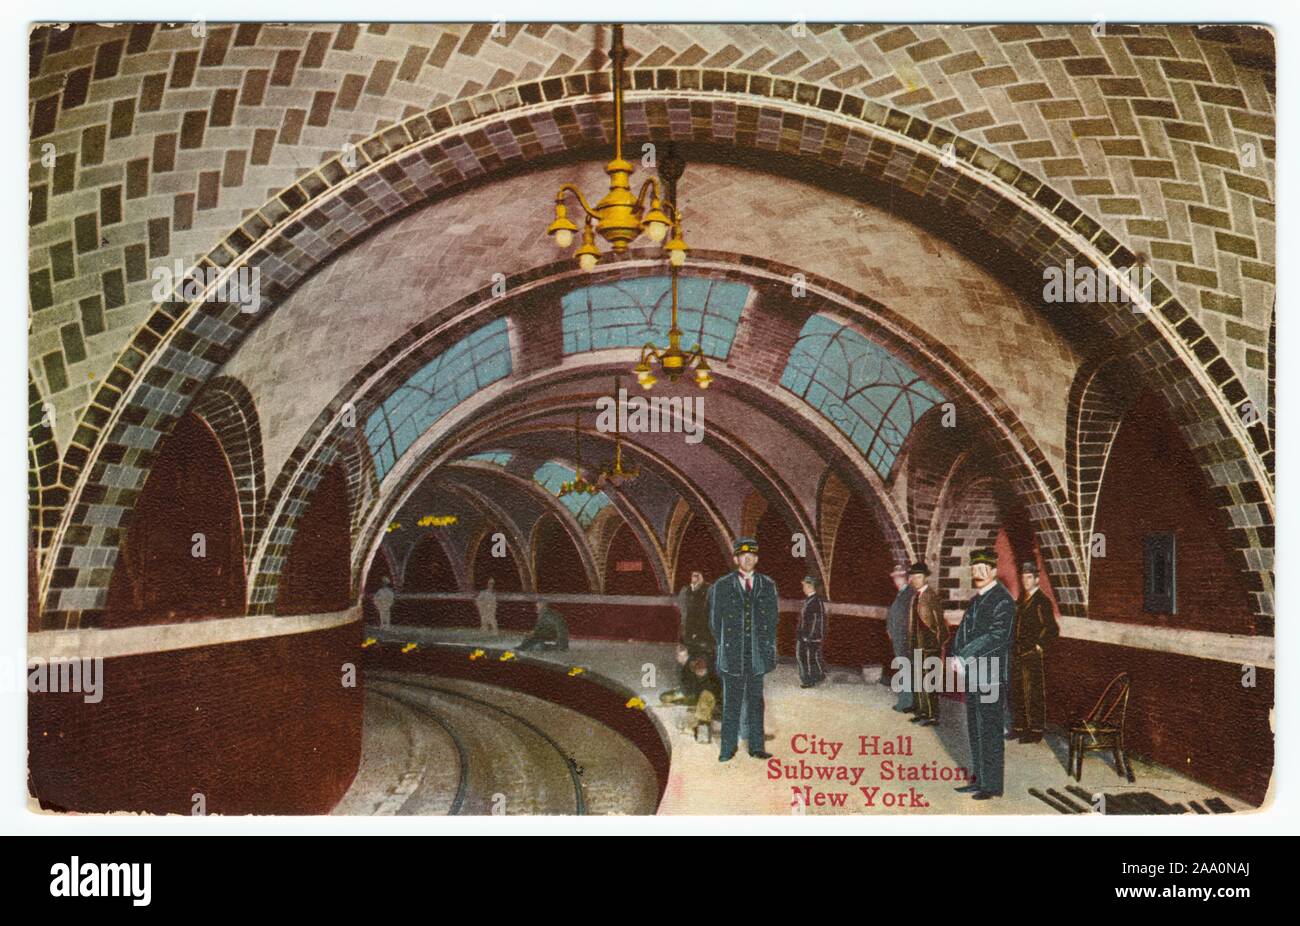 Illustrated postcard of railroad employees standing below the vaulted ceiling and skylight of the City Hall subway station, Manhattan, New York City, published by Success Postal Card Co, 1910. From the New York Public Library. () Stock Photo